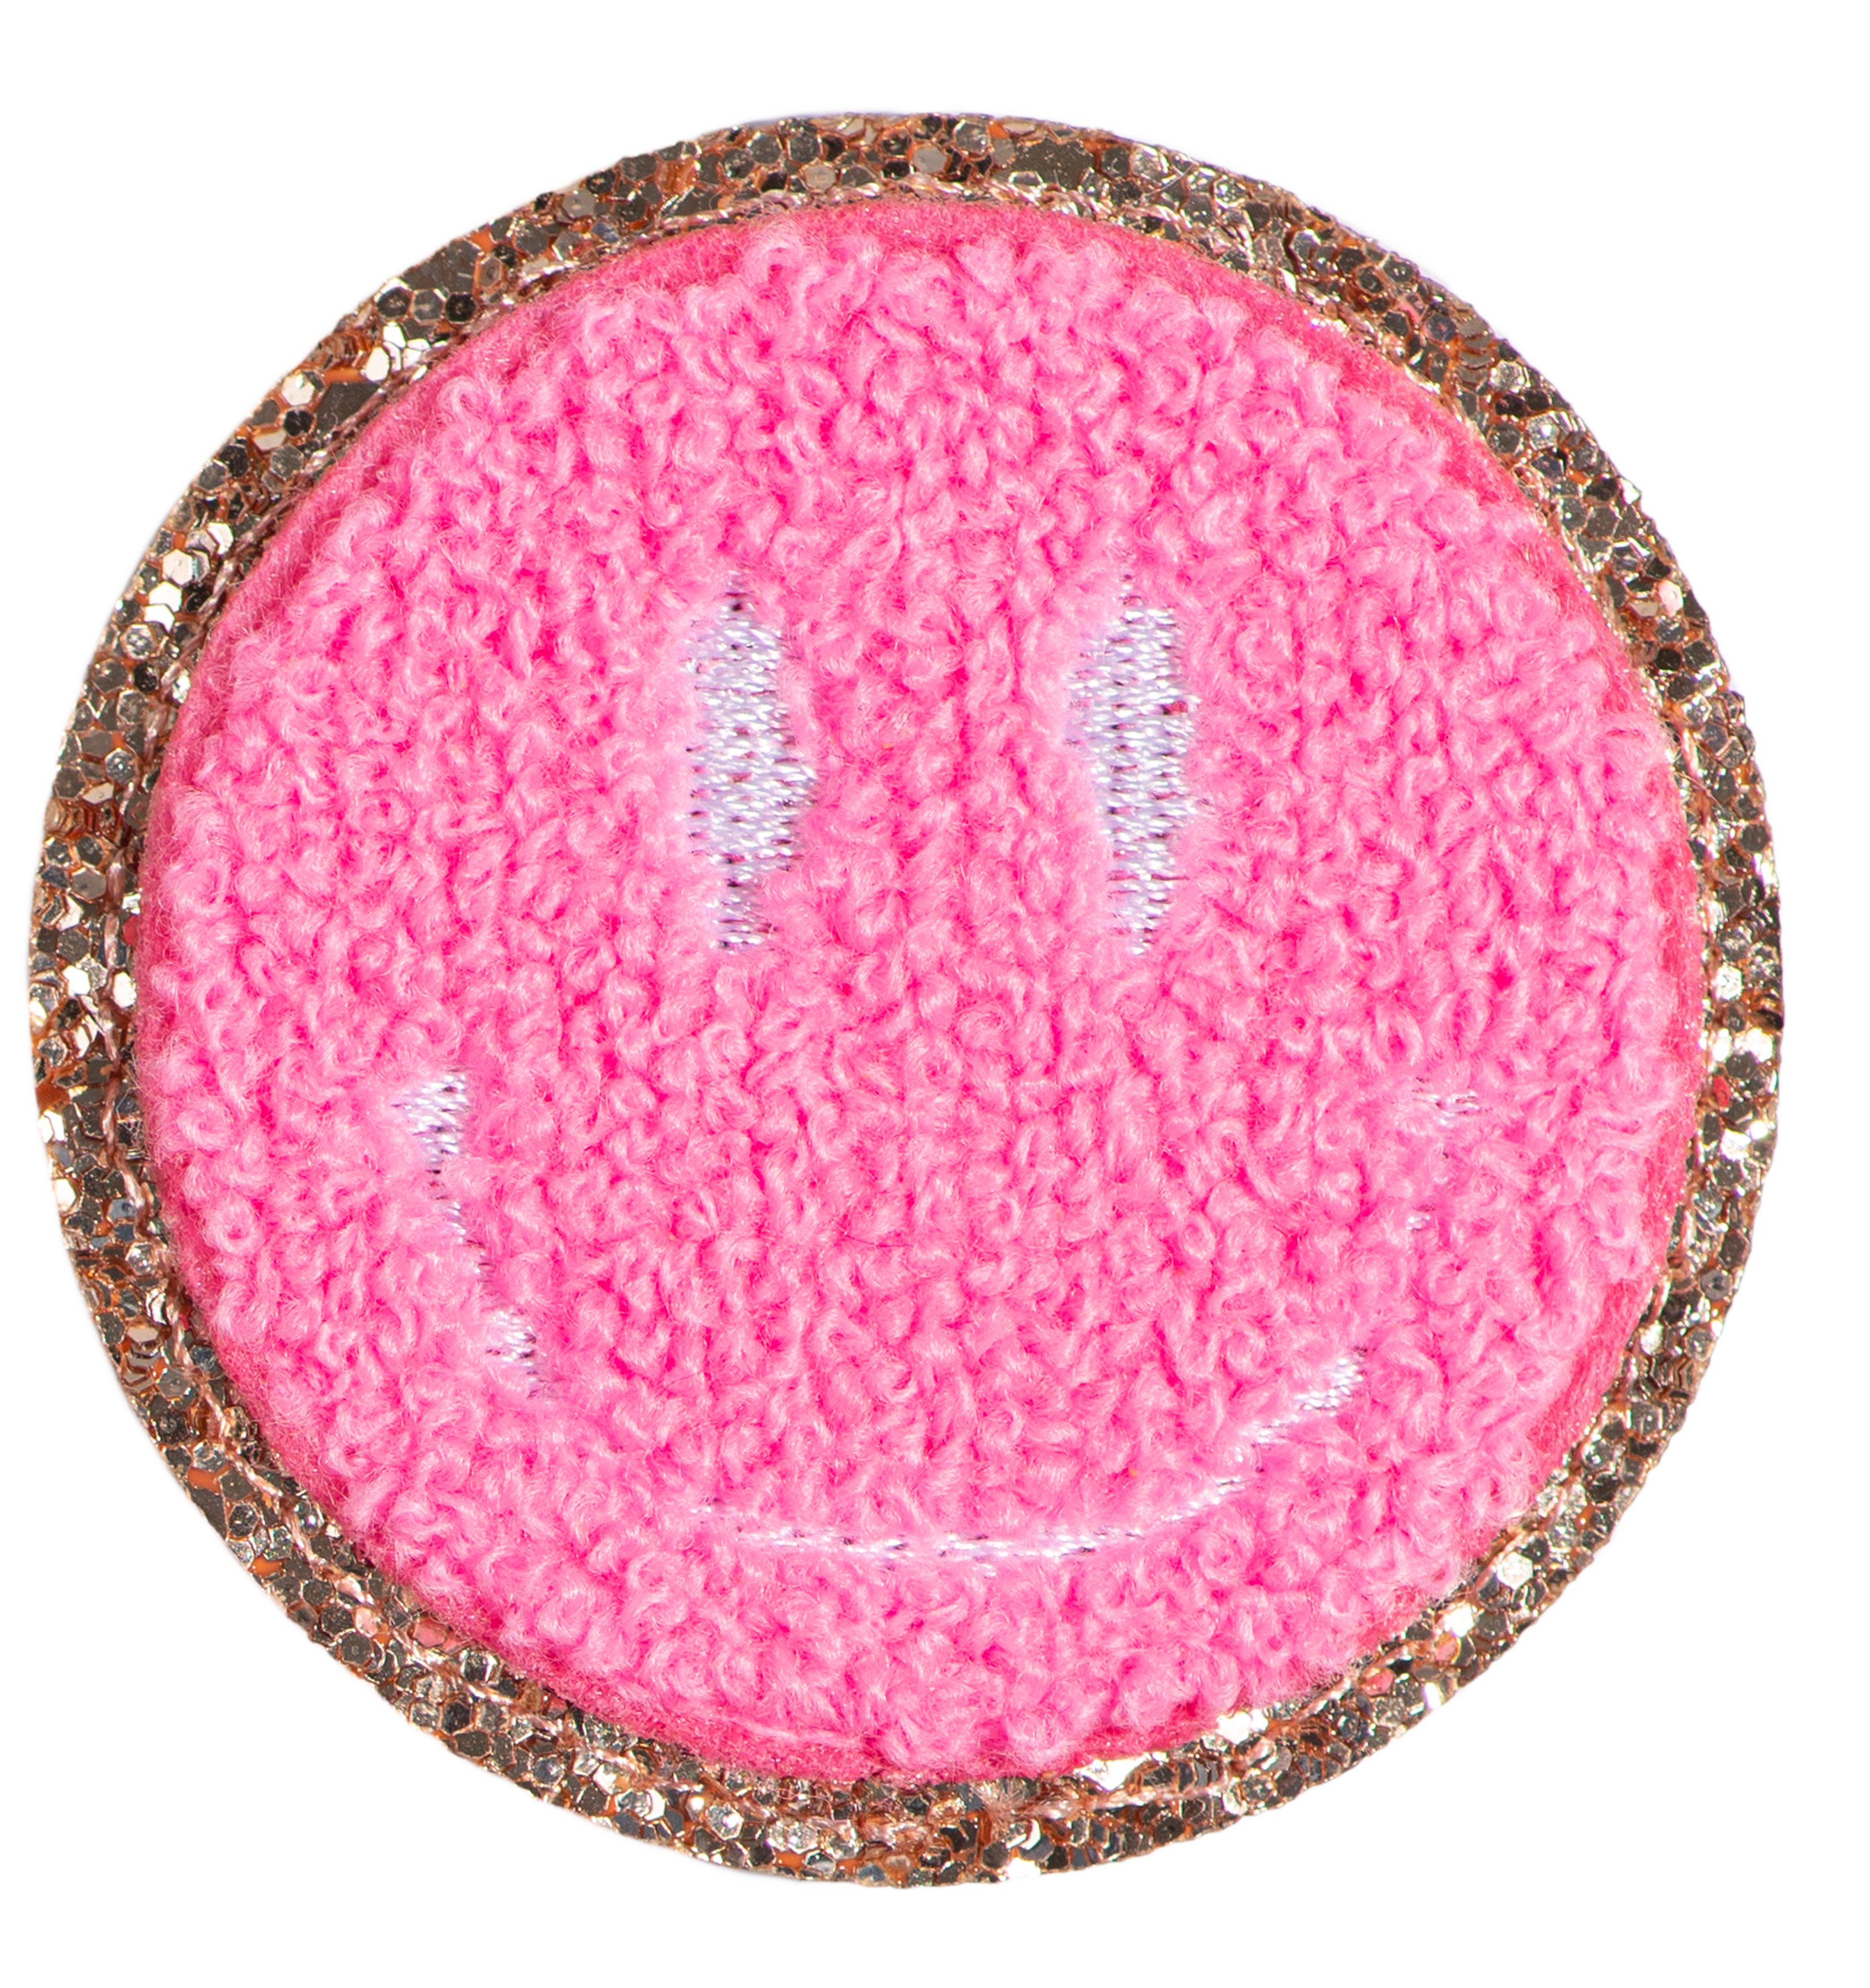 Patch - Neon Pink Smiley face | somethingbaby